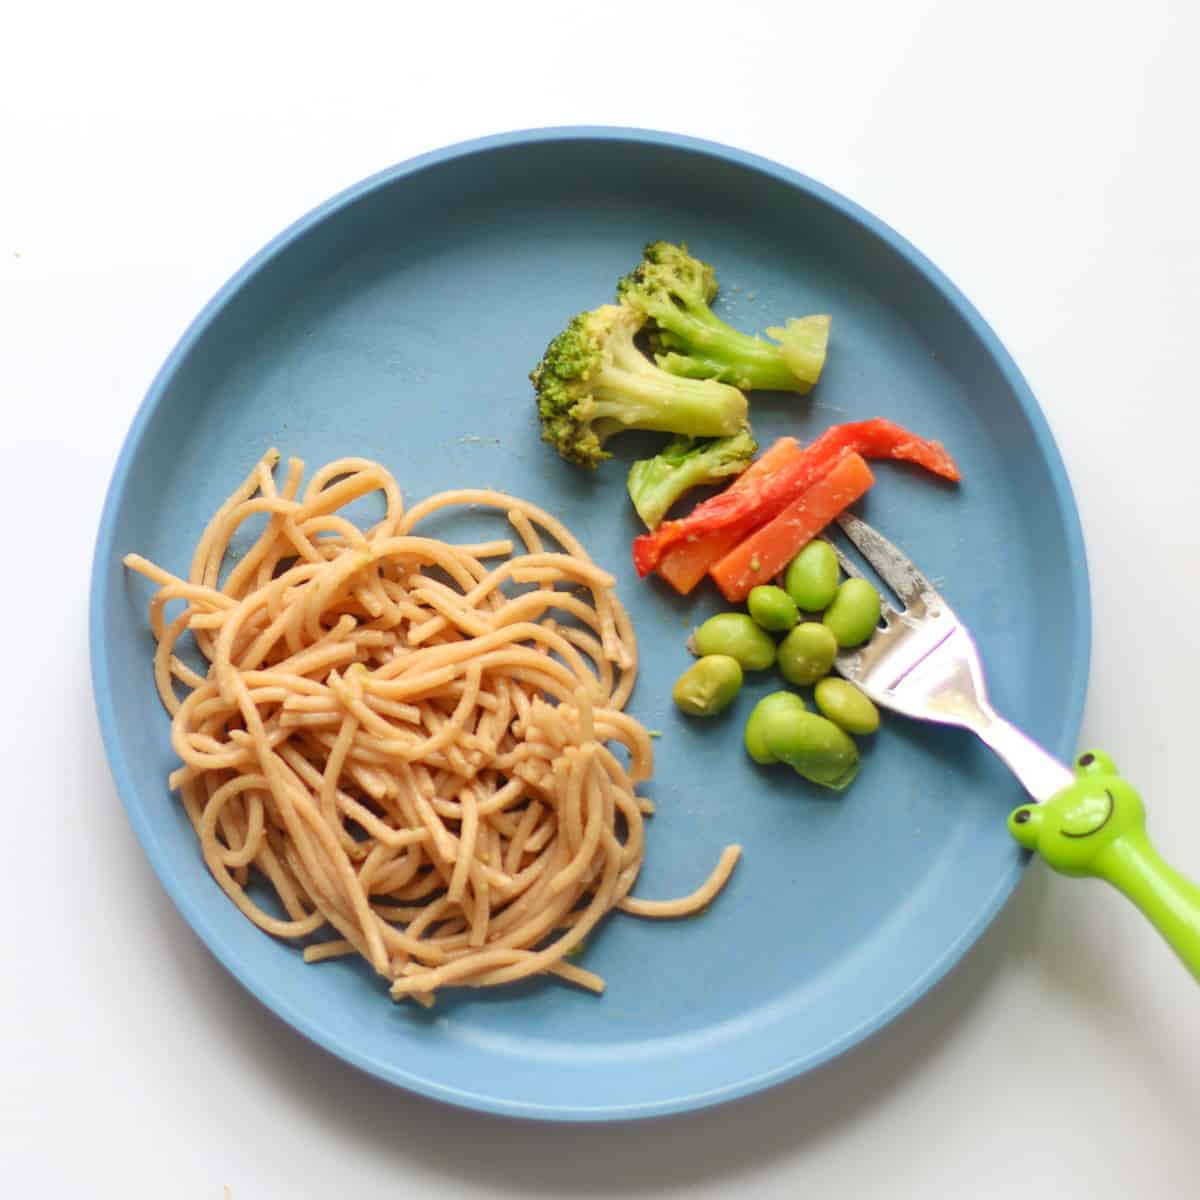 Toddler's plate with pasta and vegetables separated.